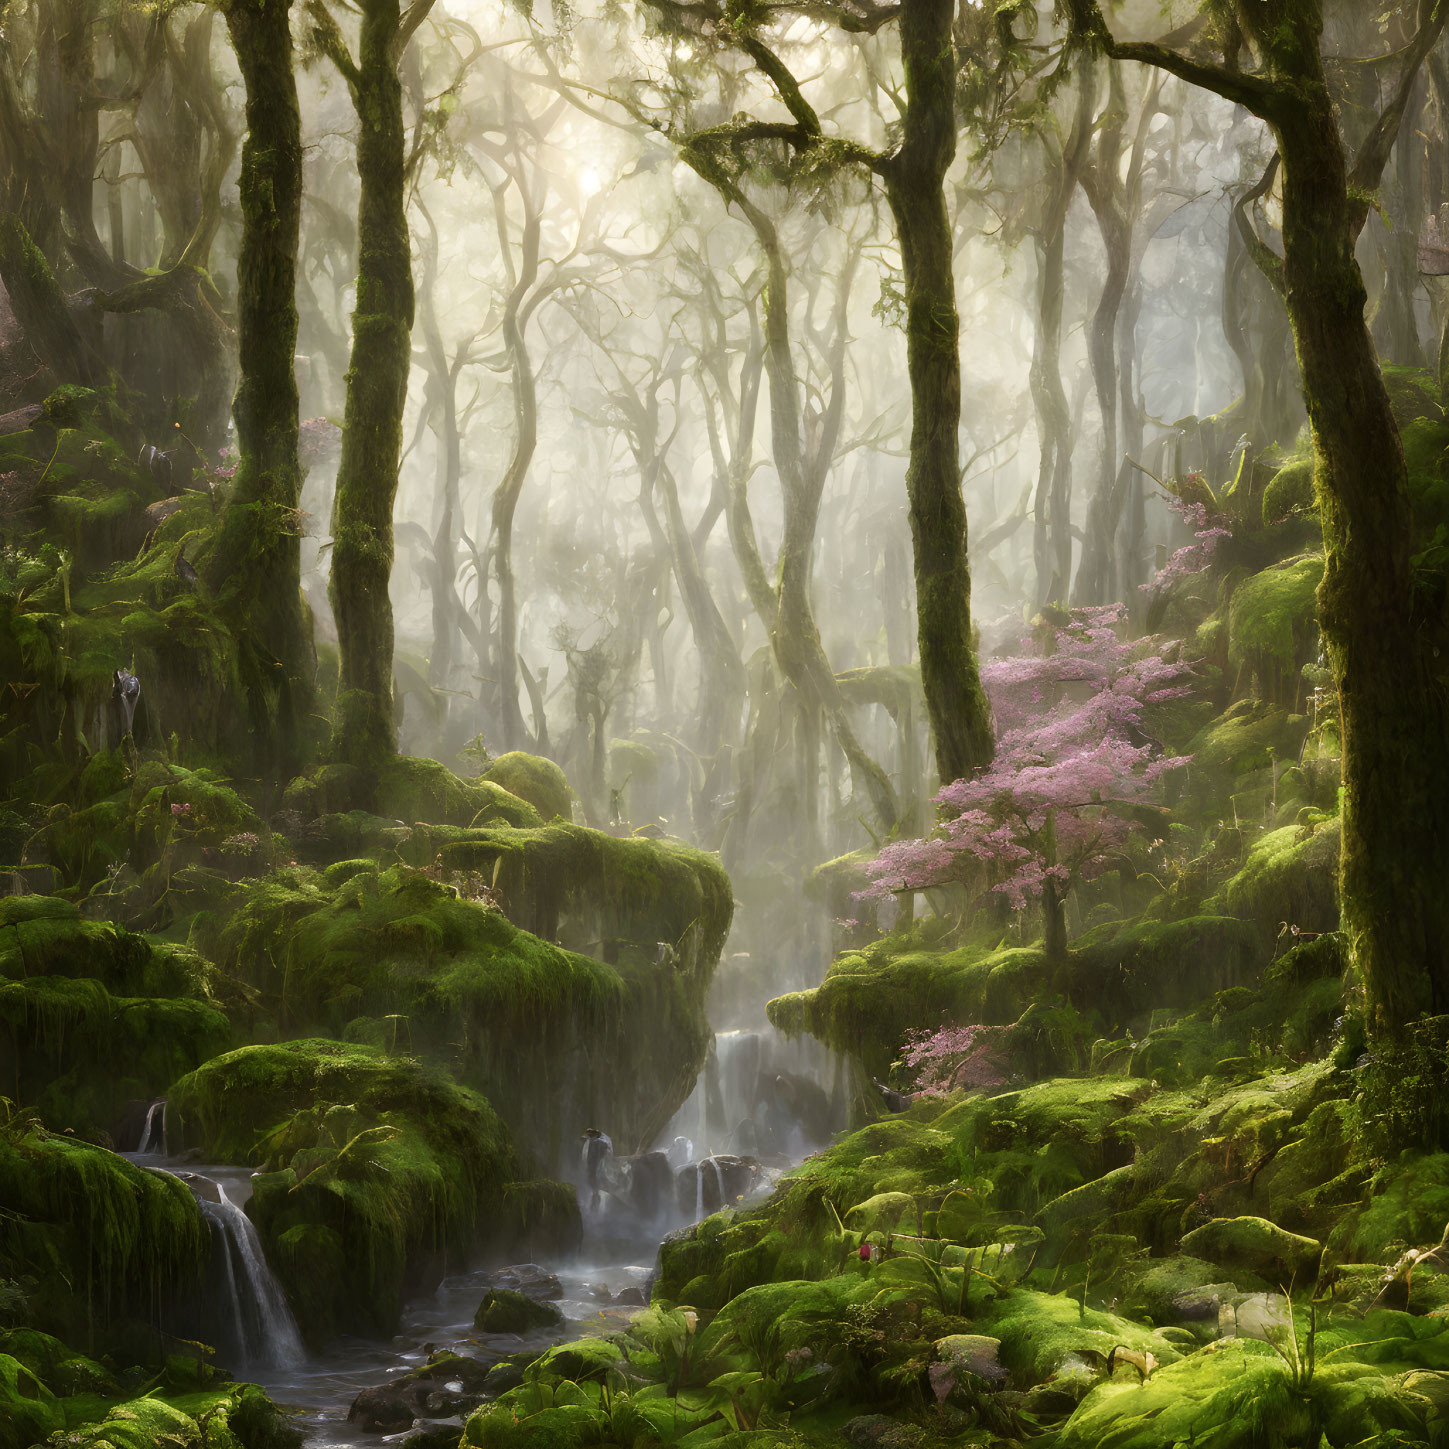 Misty forest with sunbeams, green moss, pink tree, and babbling brooks.